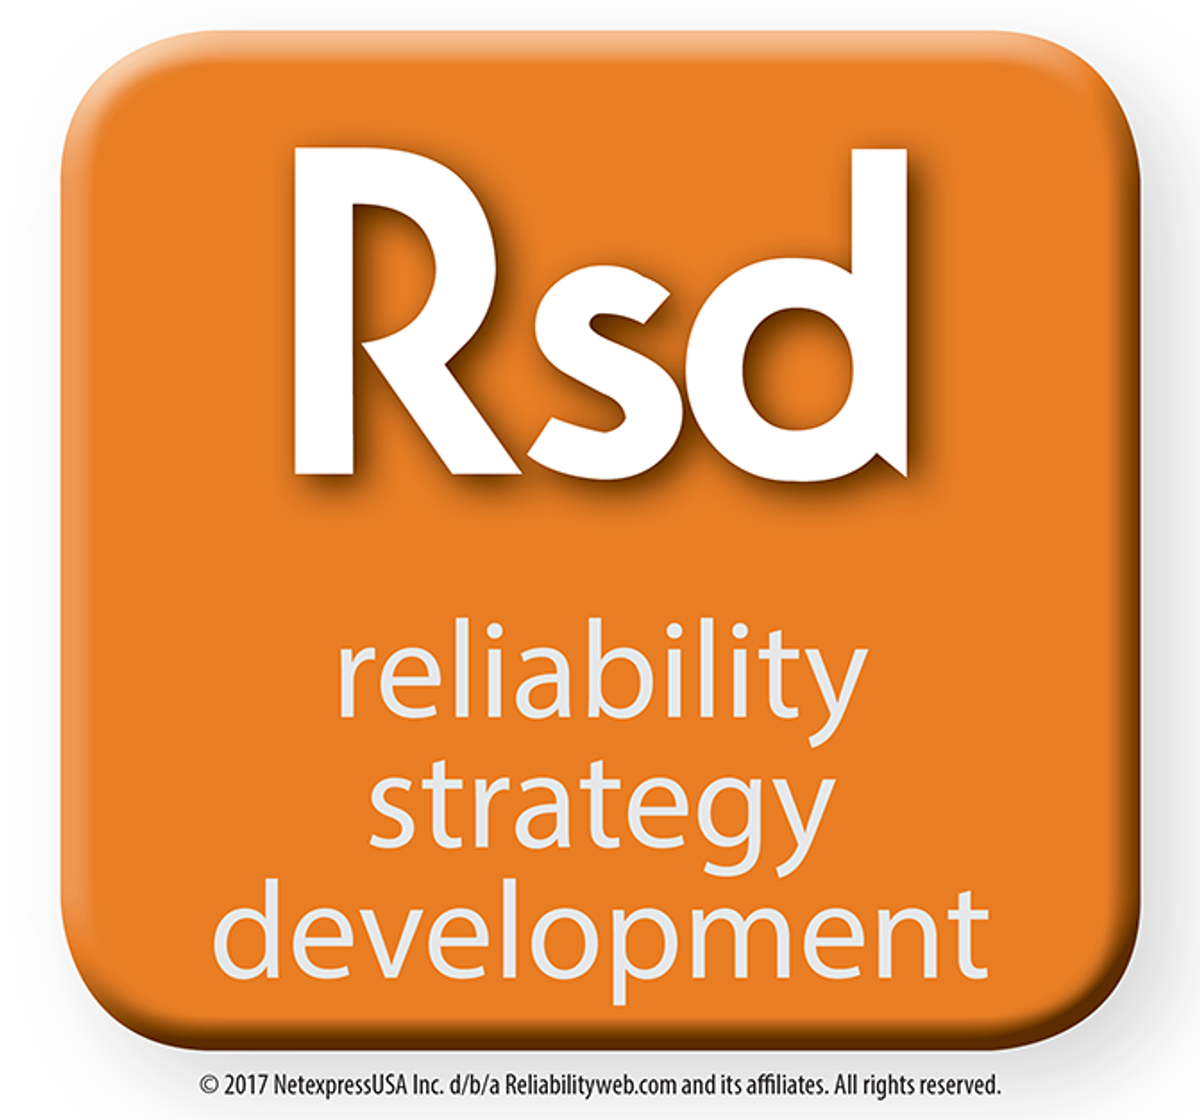 Availability is part of the Reliability Strategy Development toolbox